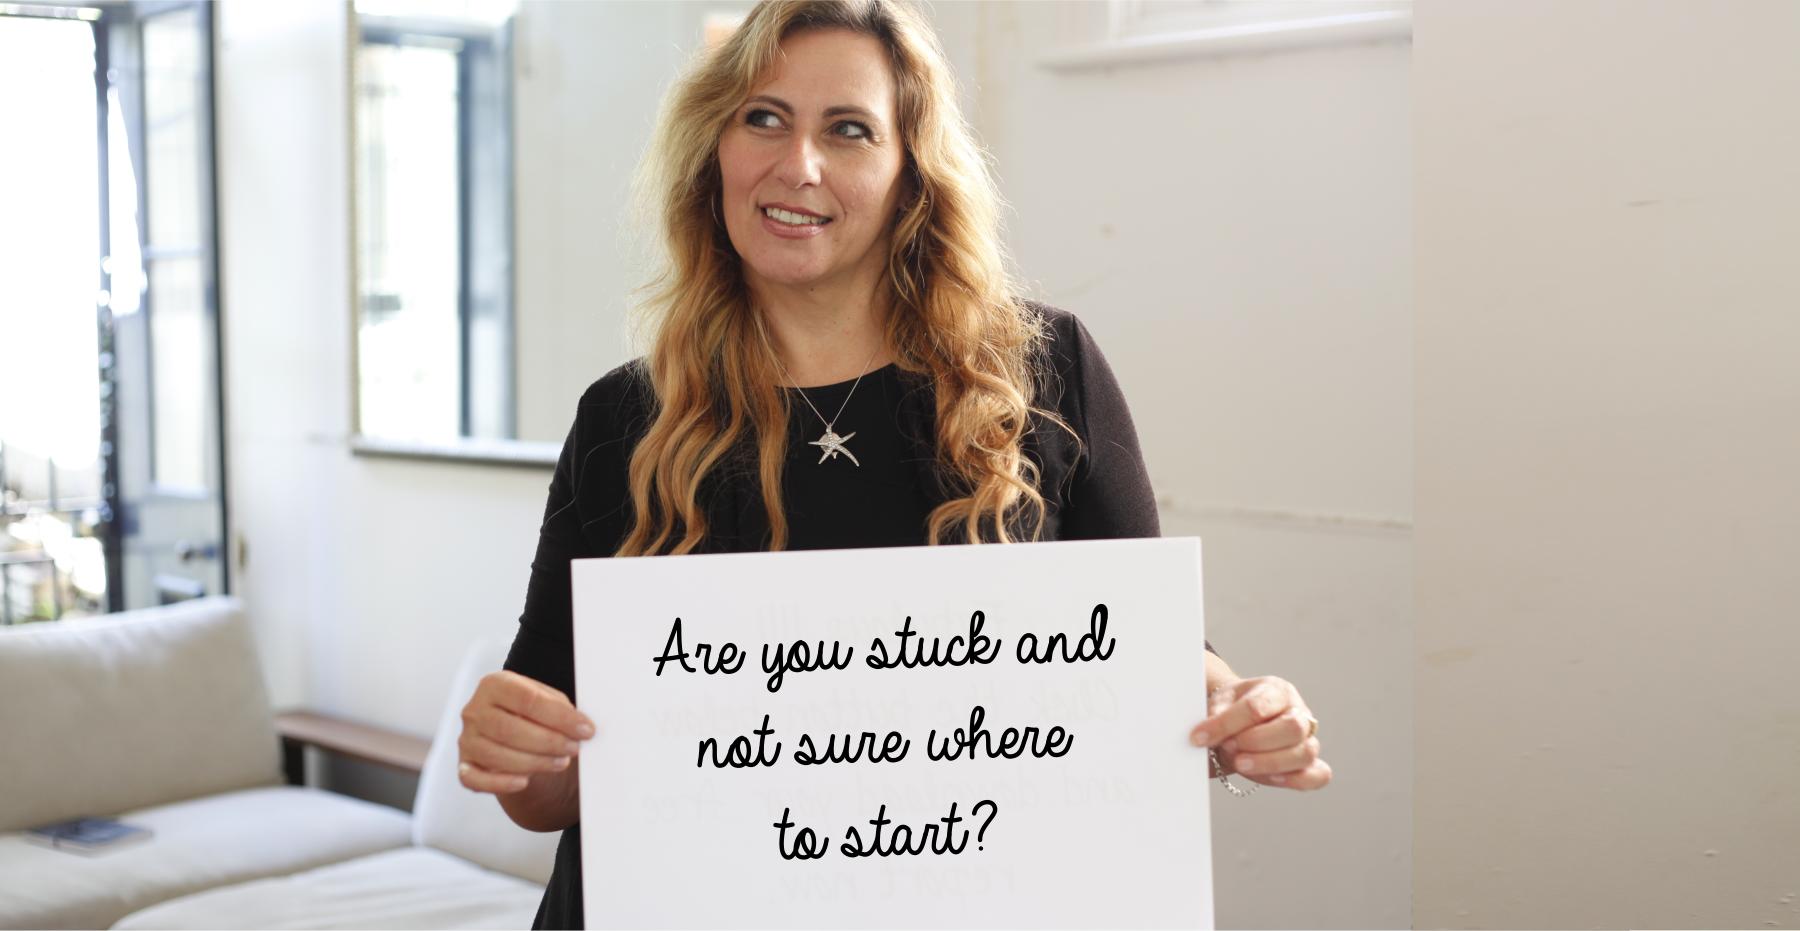 Ivana Katz - Are you stuck and not sure where to start?